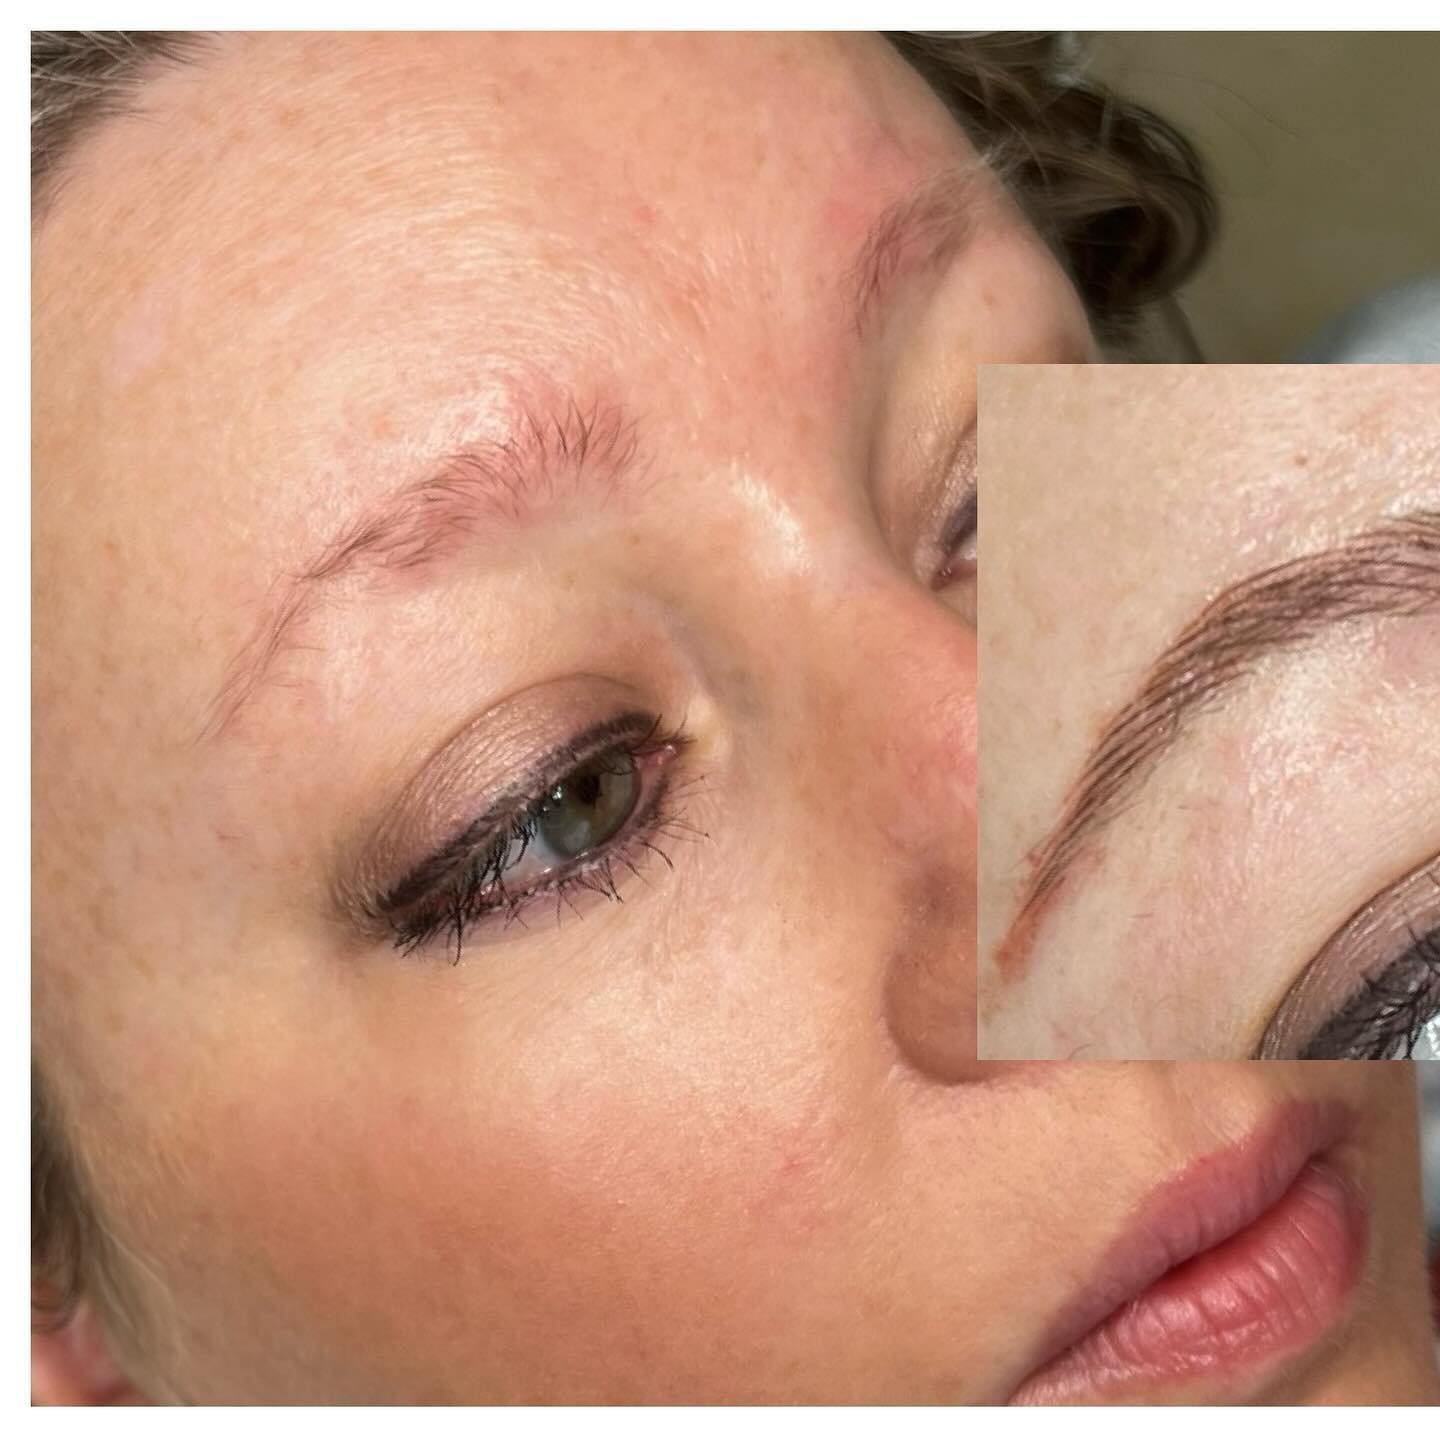 Clients first session of microblading!
These will heal slightly lighter in color and softer. At her 6 week perfecting session I&rsquo;ll add more strokes in between the healed strokes to add density and she&rsquo;ll be good to go for at least a year!